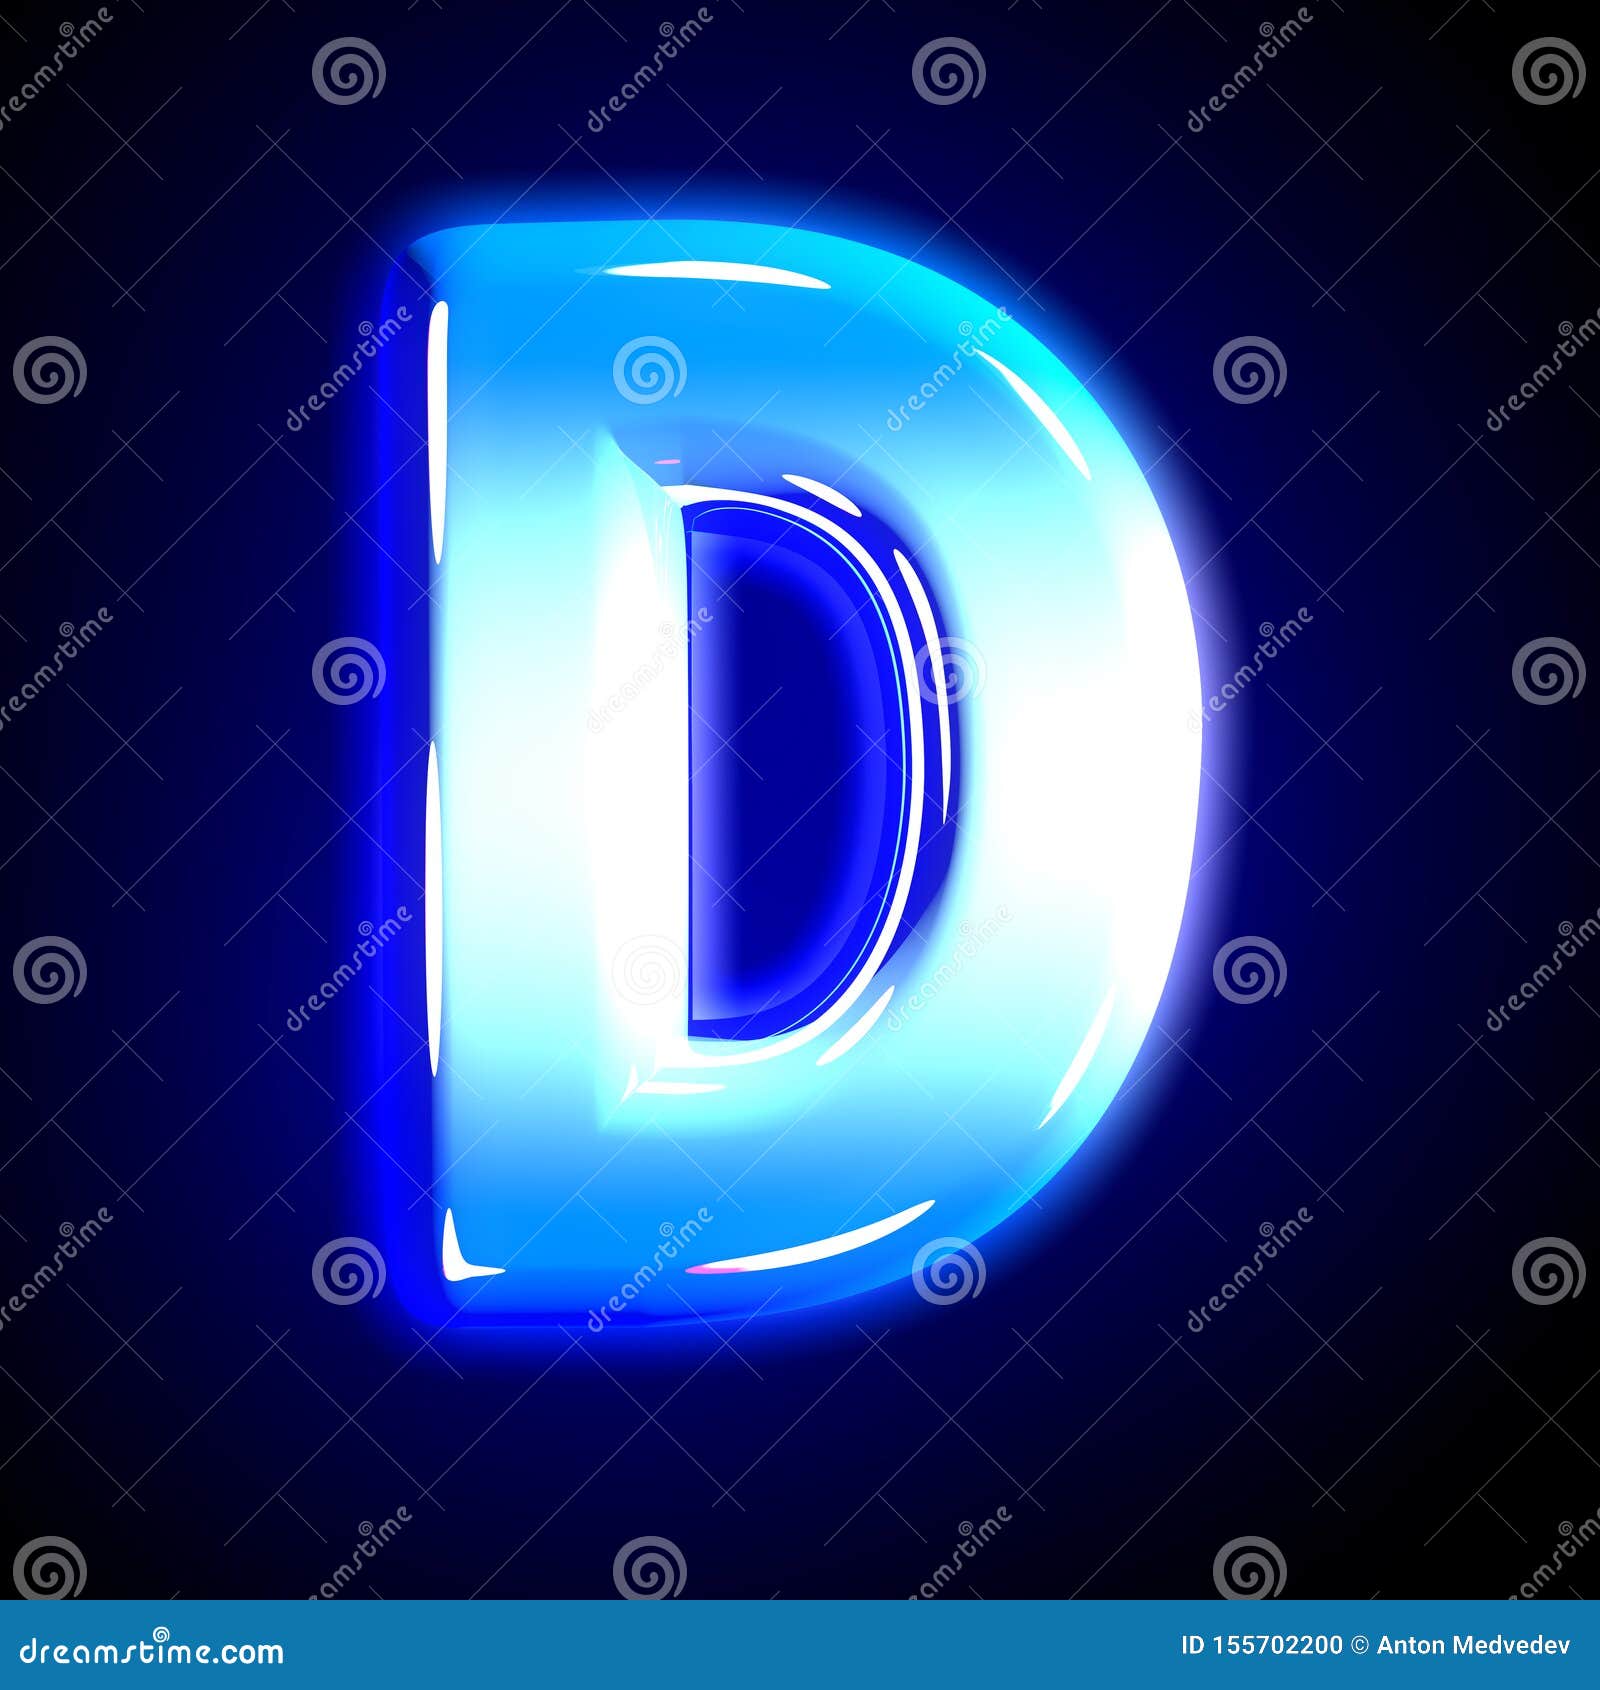 Frozen Ice Letter D of Glowing Festive Blue Glossy Alphabet Isolated on ...